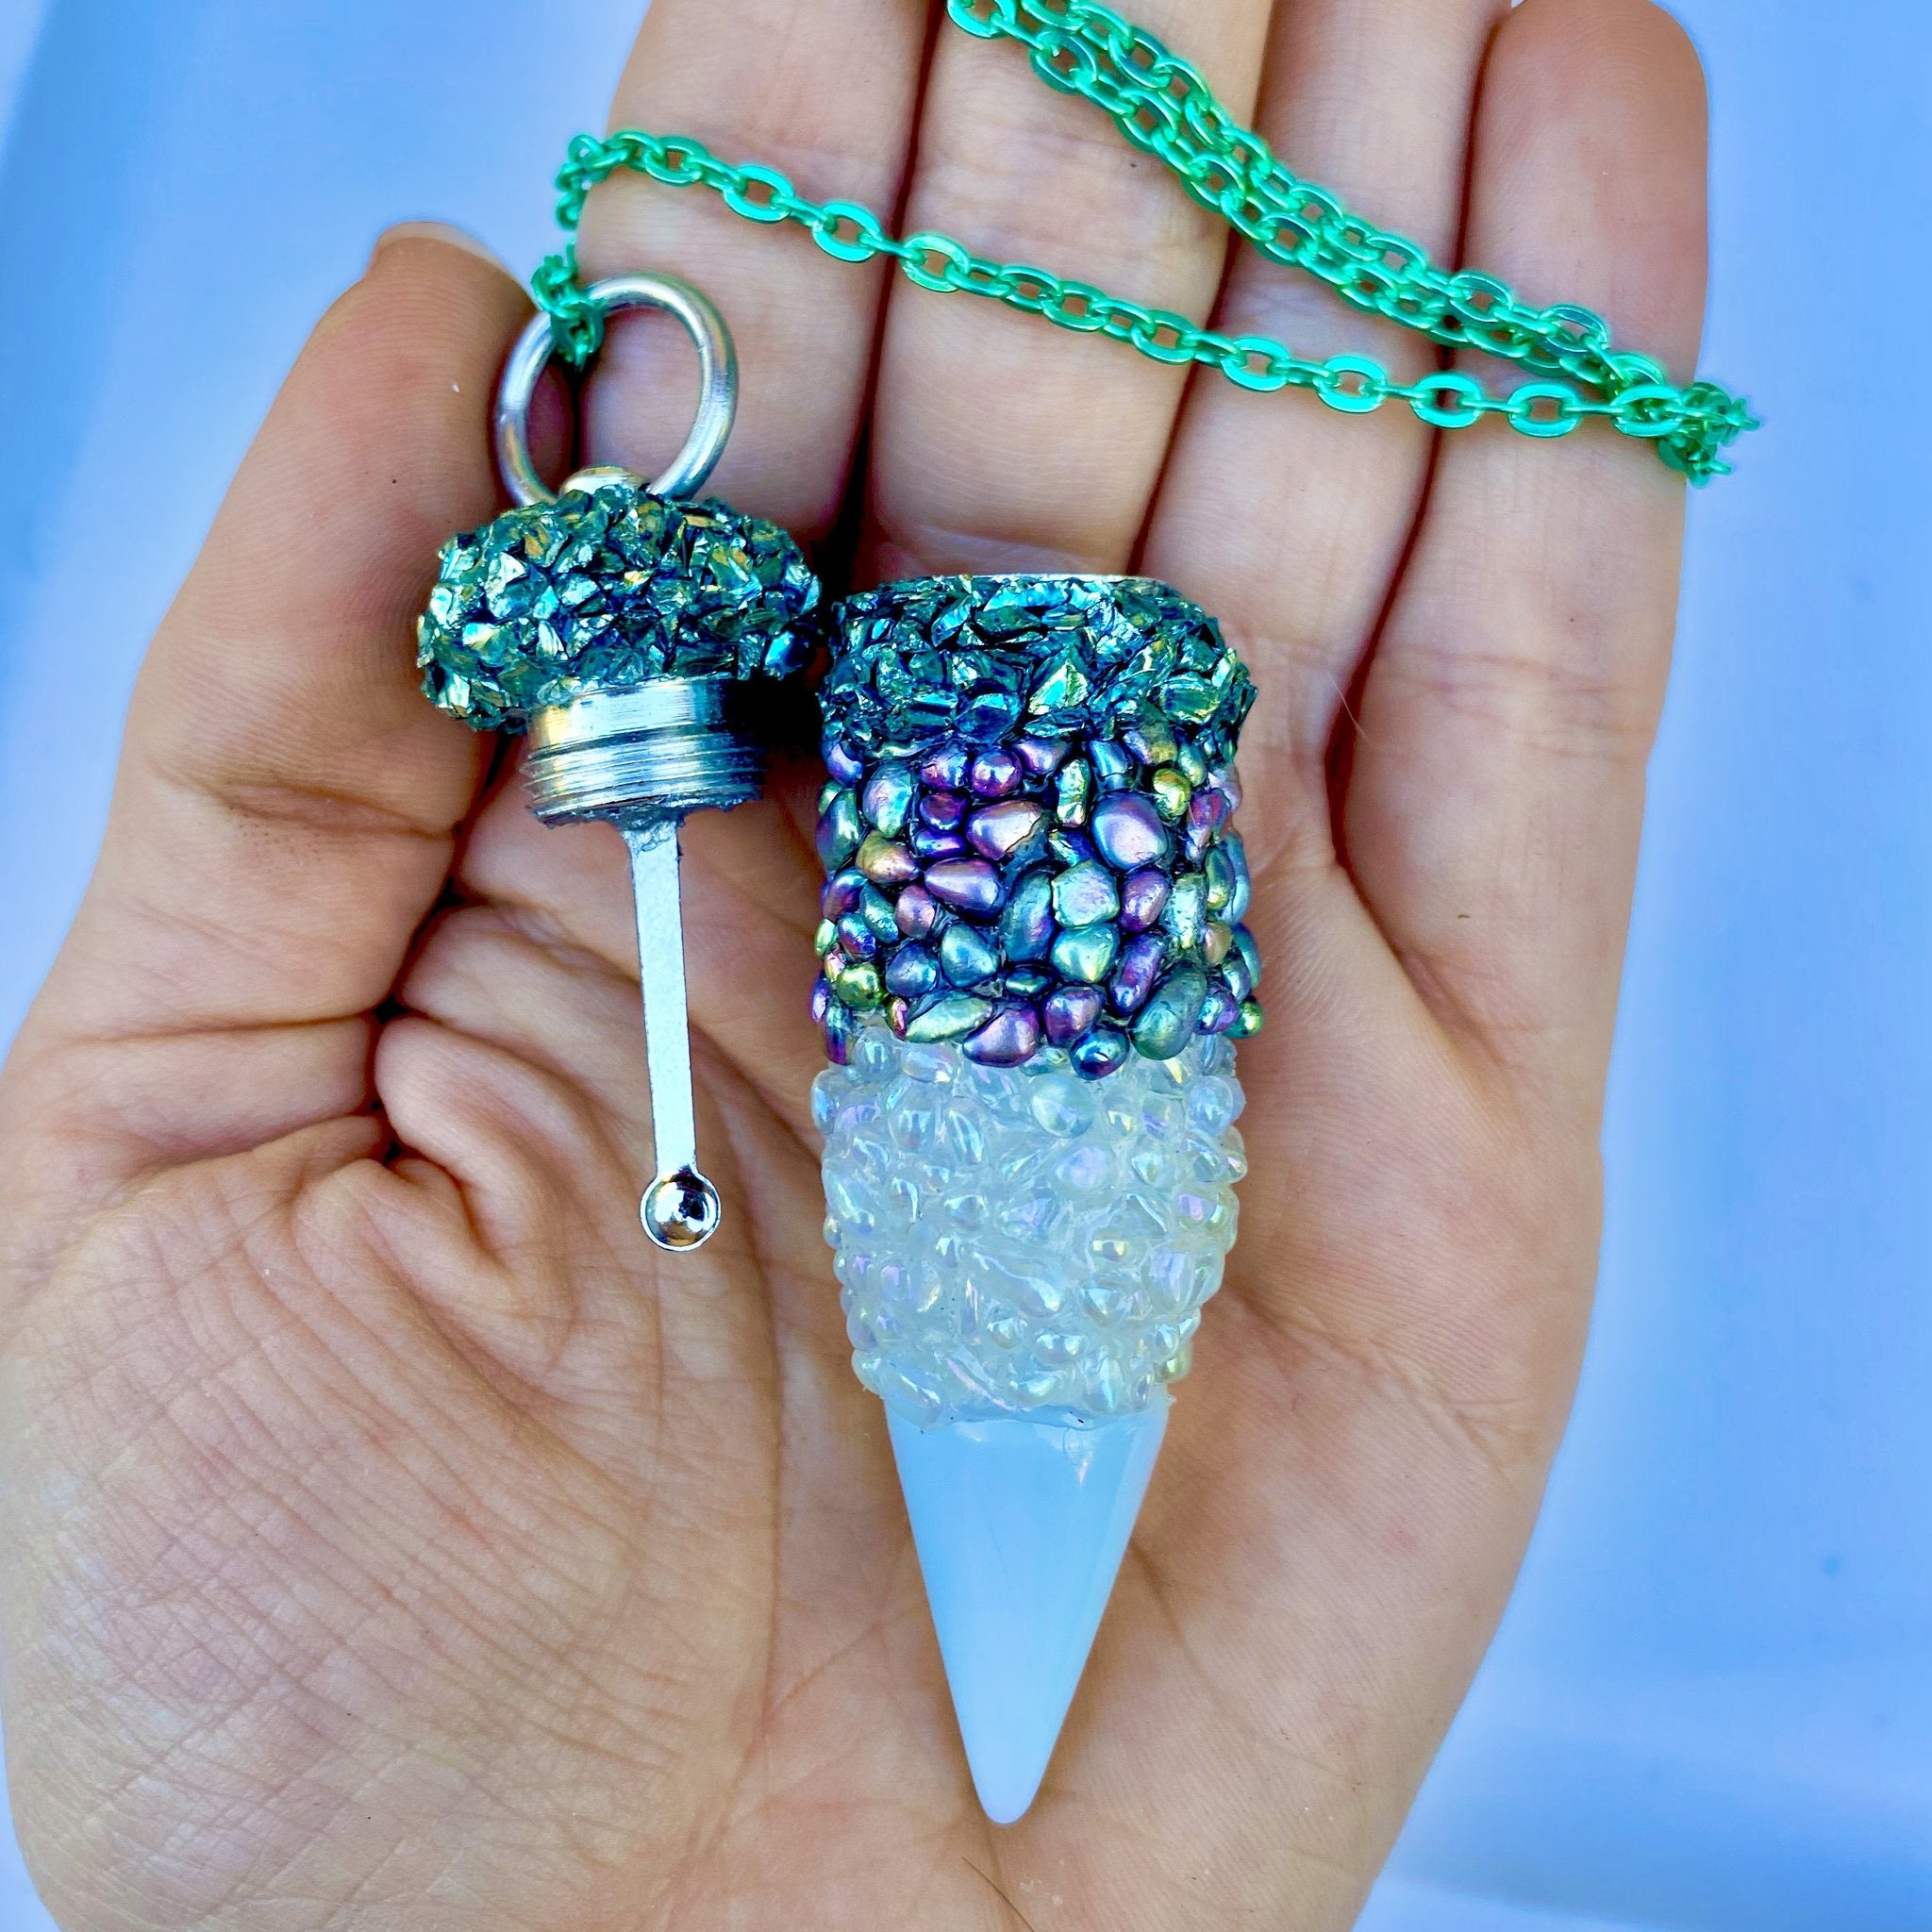 Stash Necklace With Spoon 